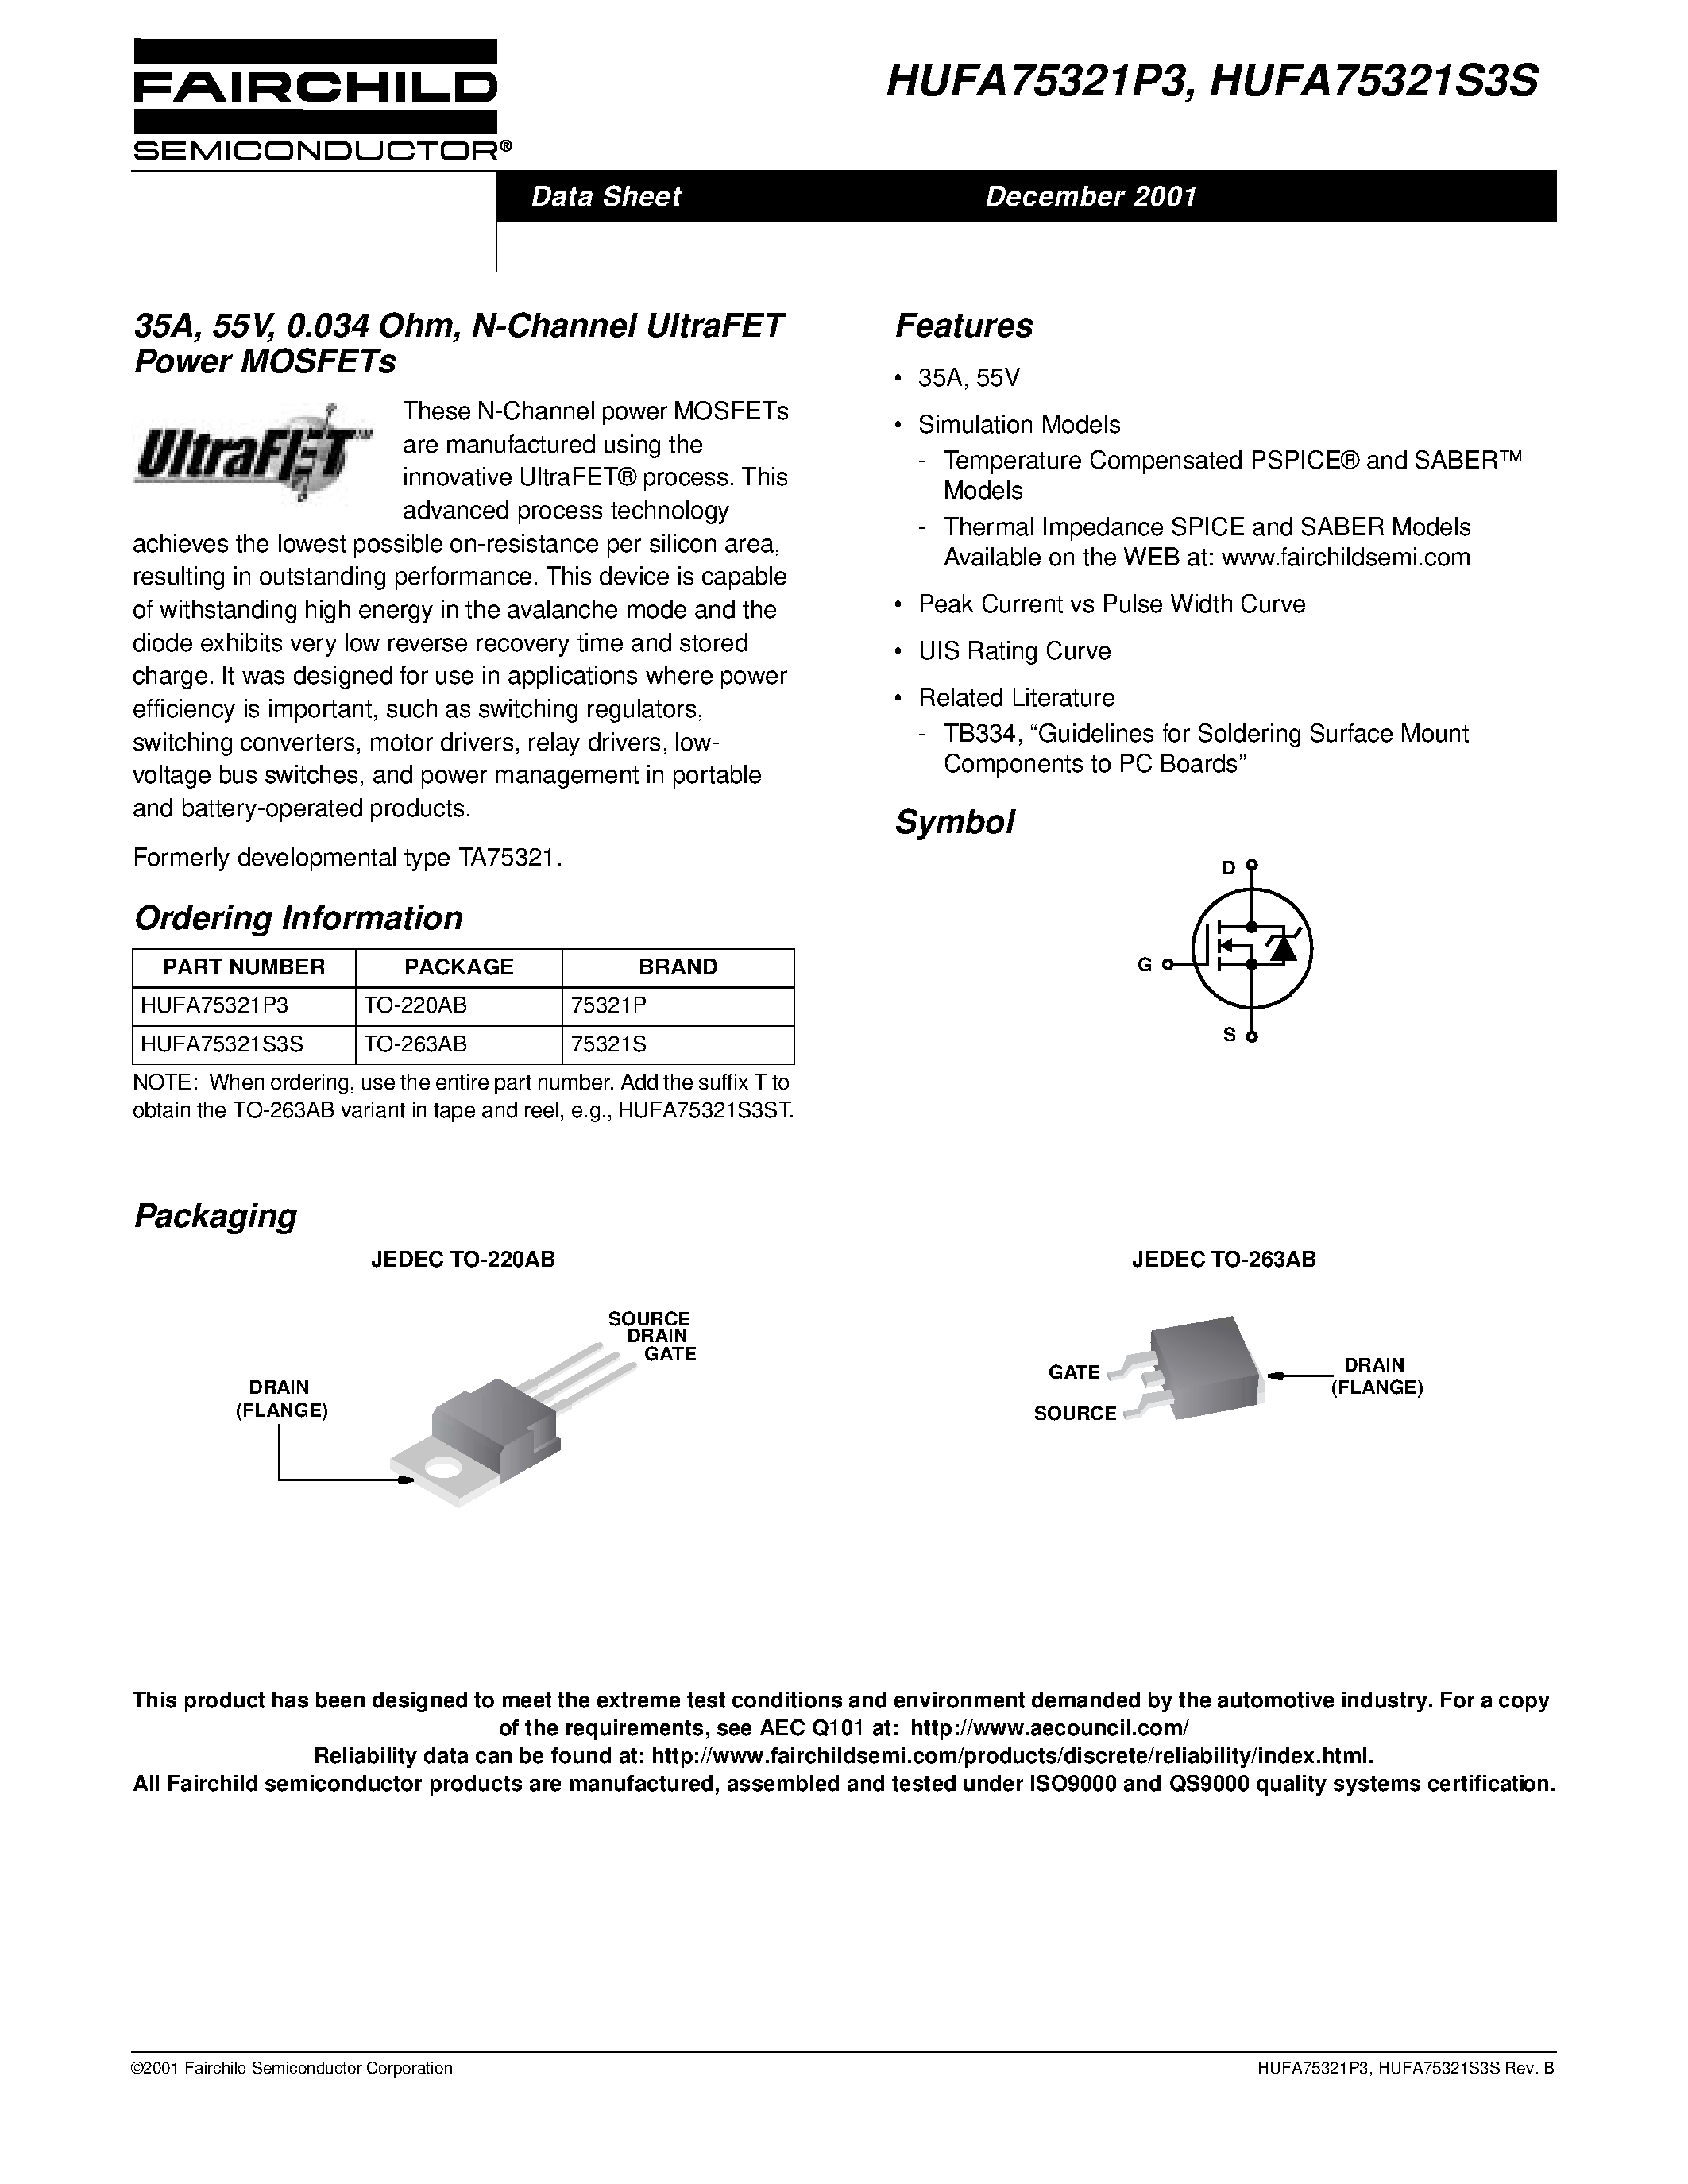 Datasheet HUFA75321S3S - 35A/ 55V/ 0.034 Ohm/ N-Channel UltraFET Power MOSFETs page 1